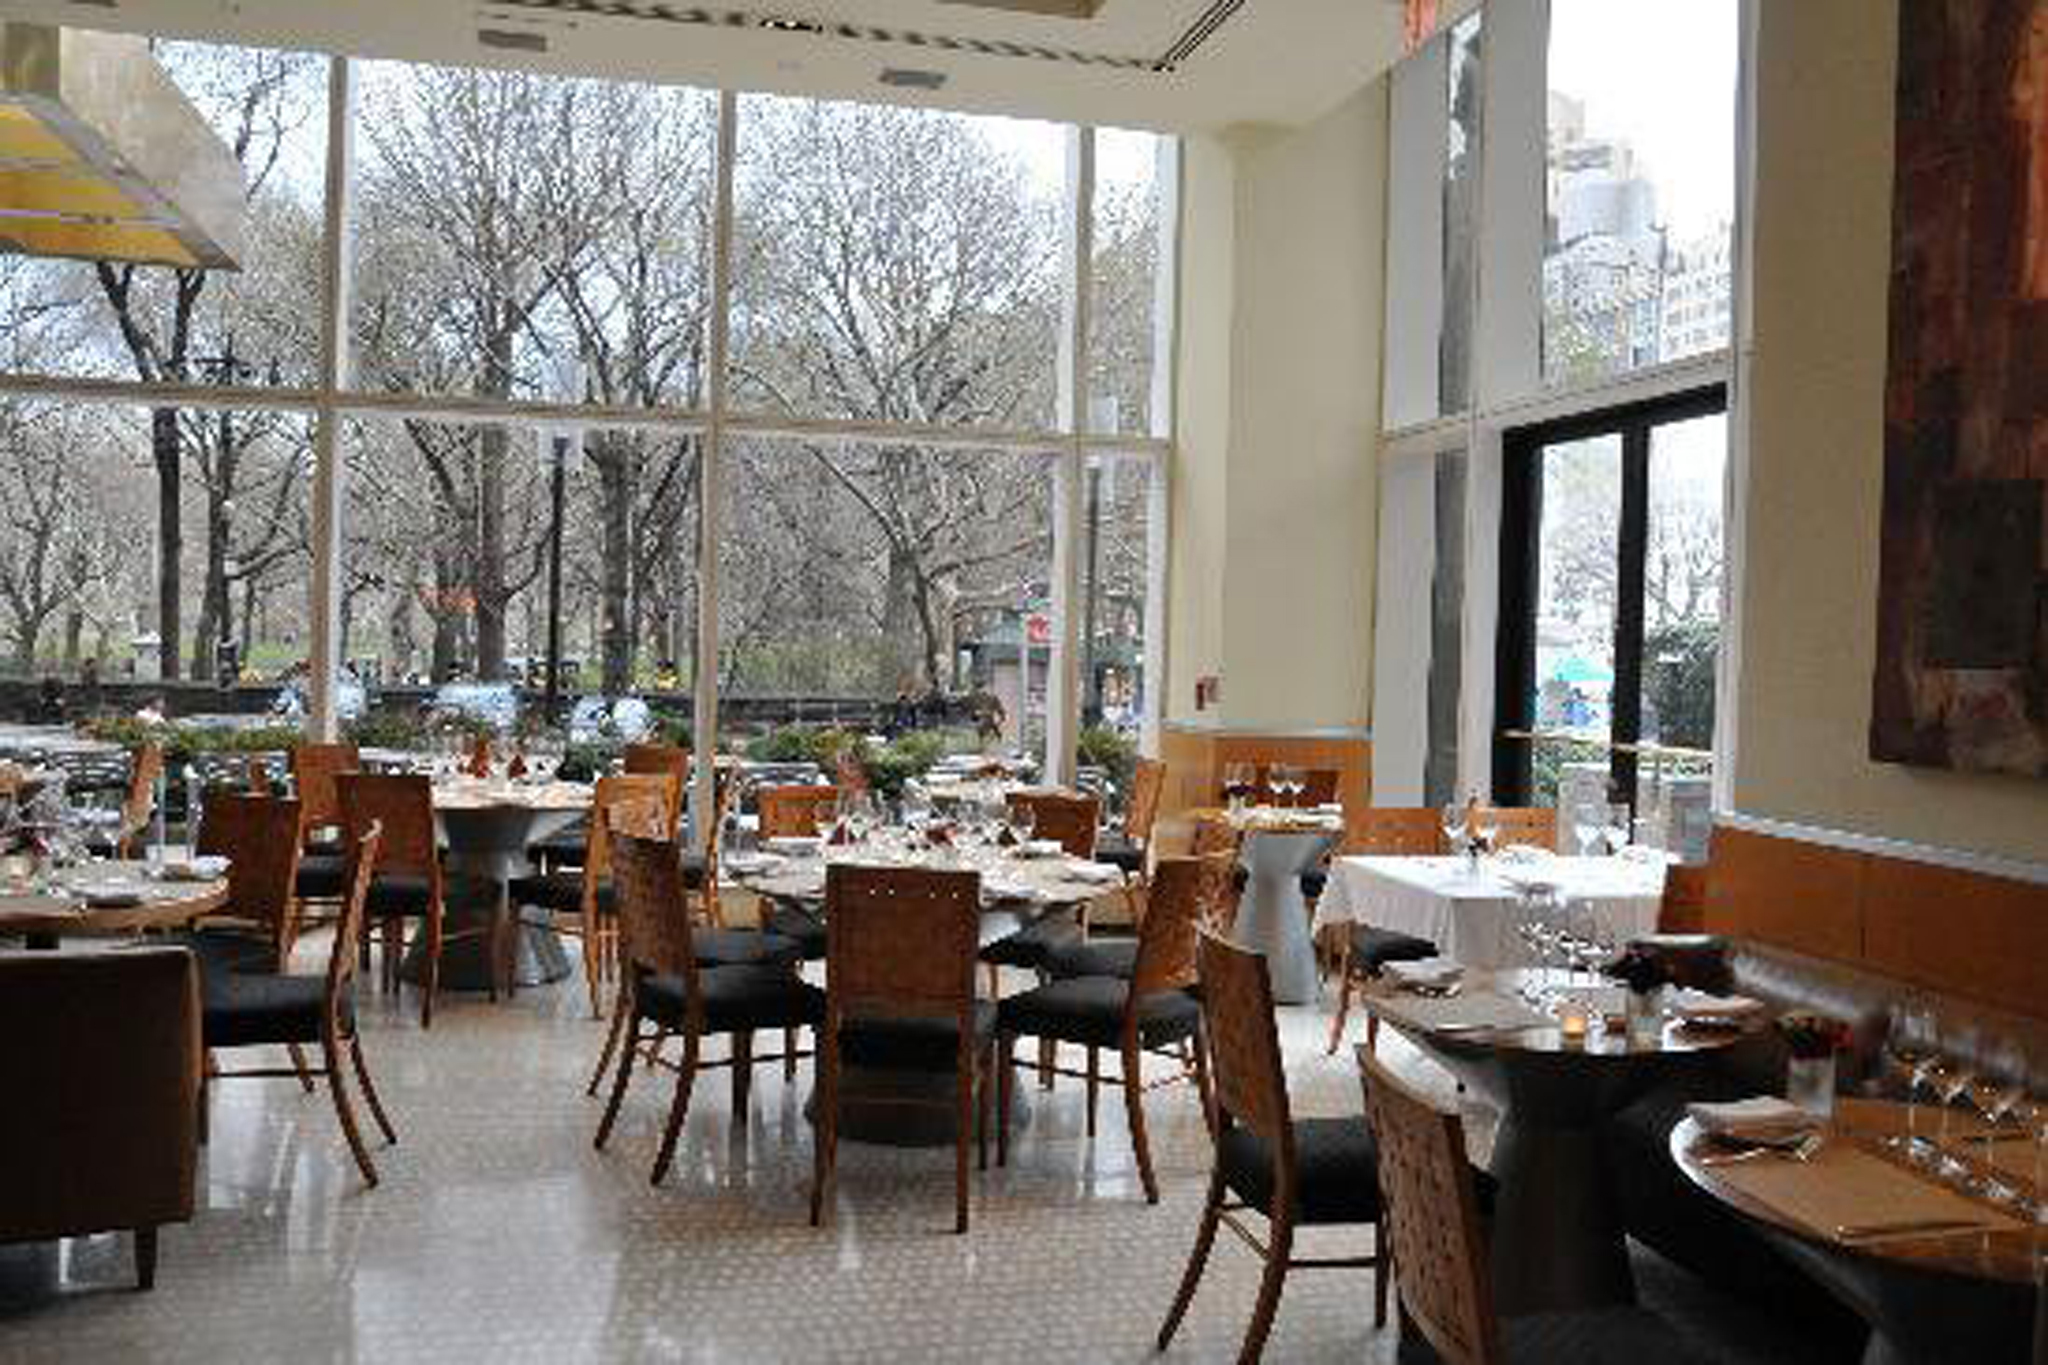 Nougatine jean georges nyc york 2010 restaurants timeout restaurant george central park ny visit west